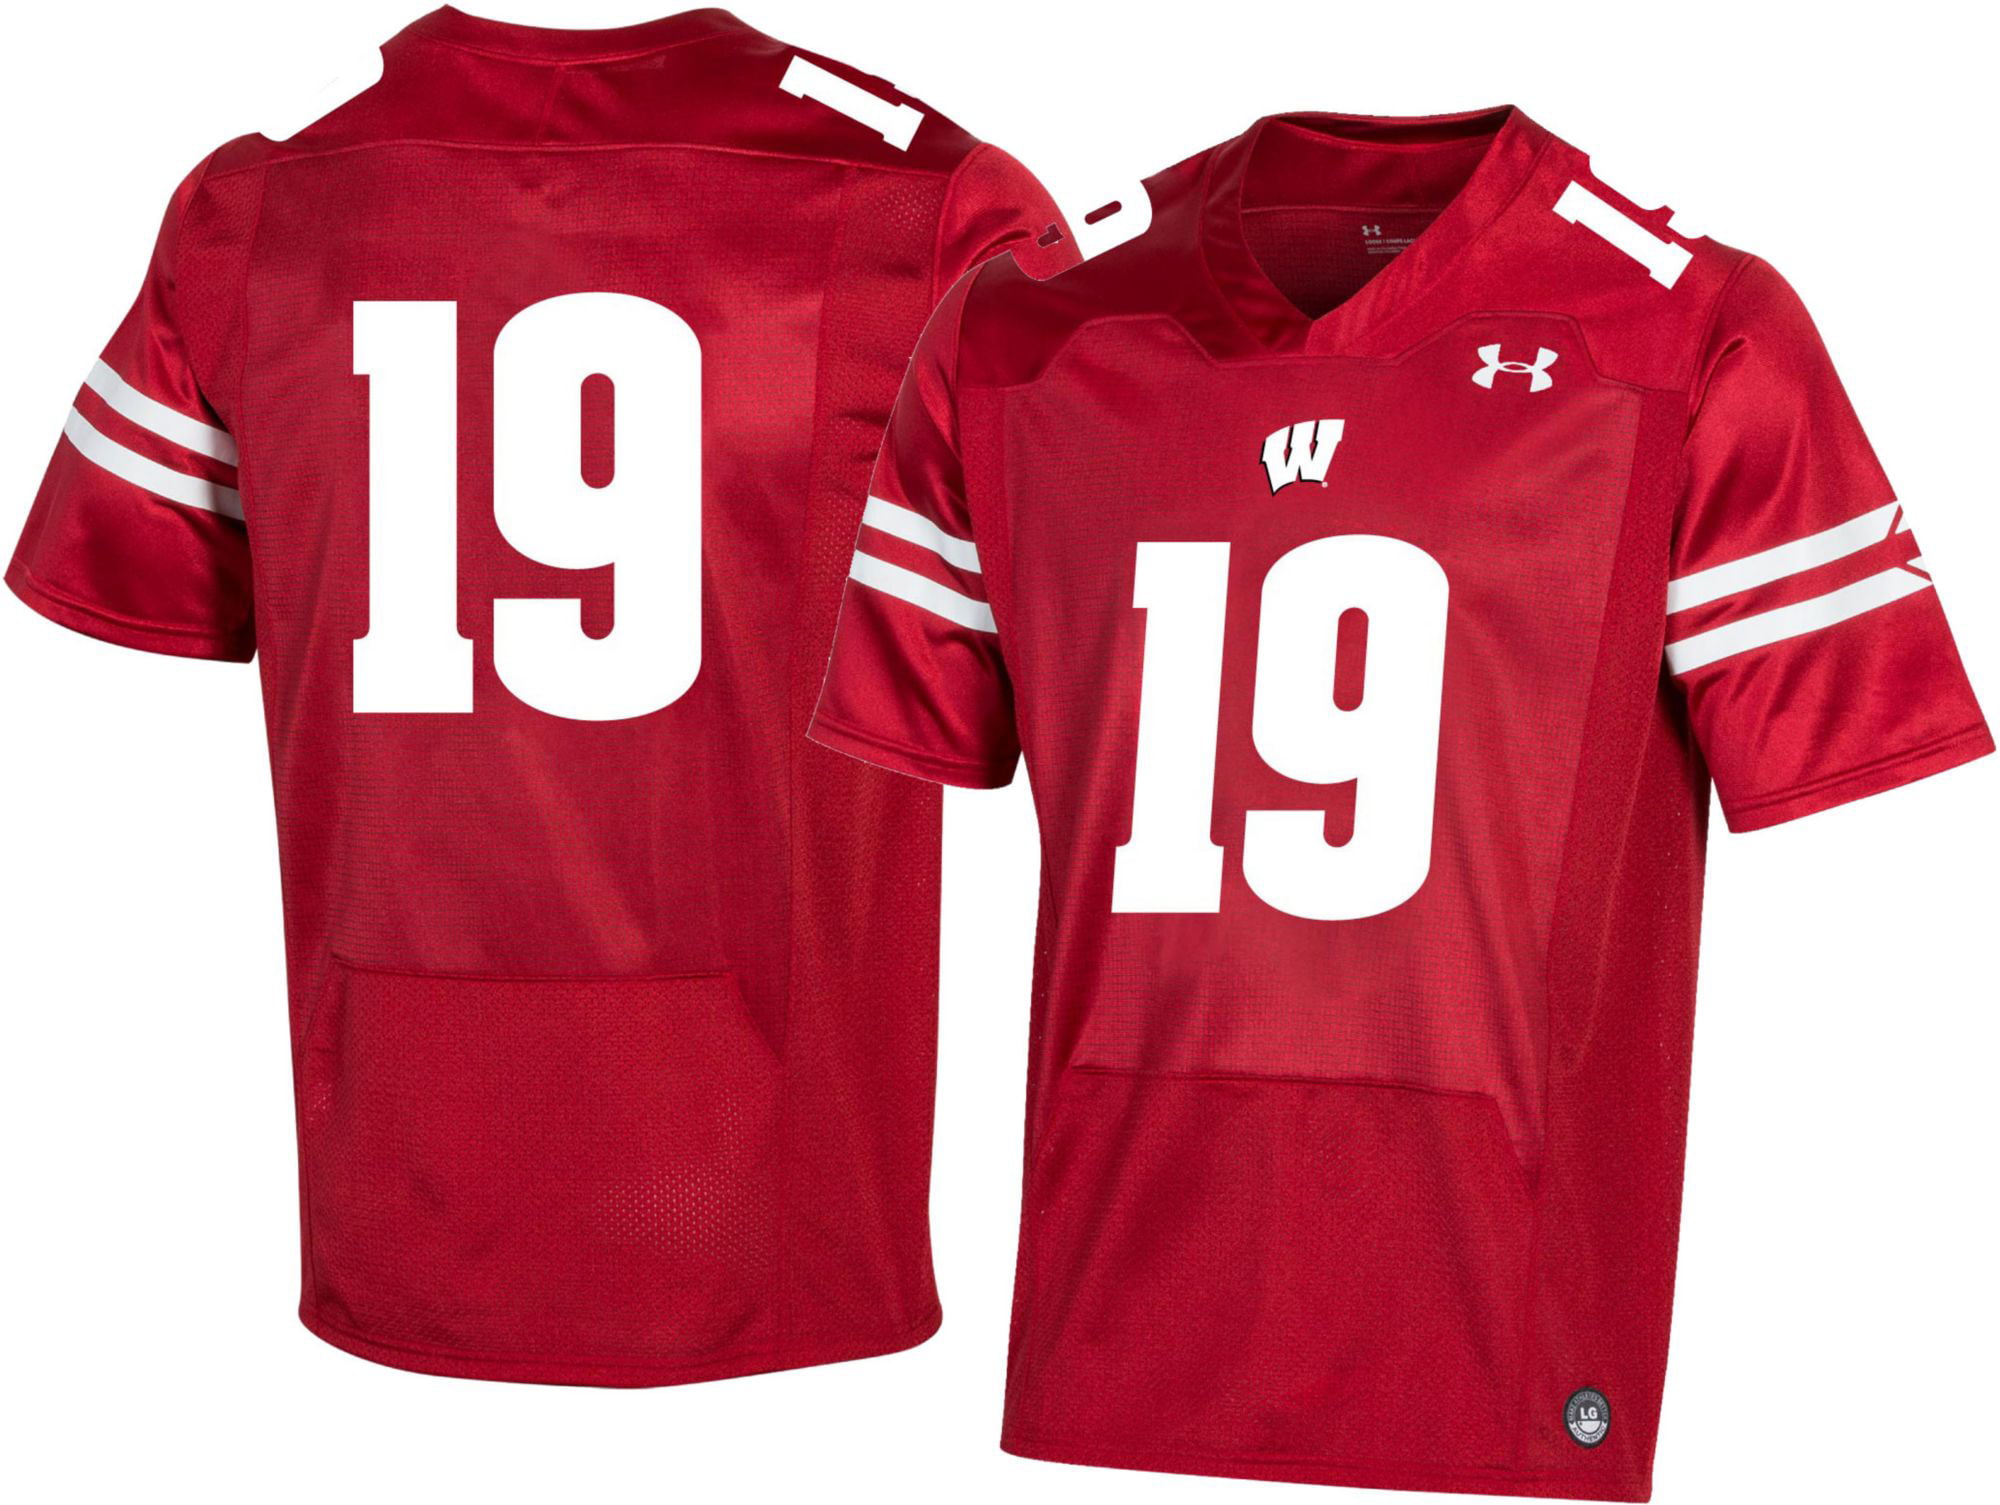 Under Armour Youth Wisconsin Badgers #19 Red Replica Football Jersey ...